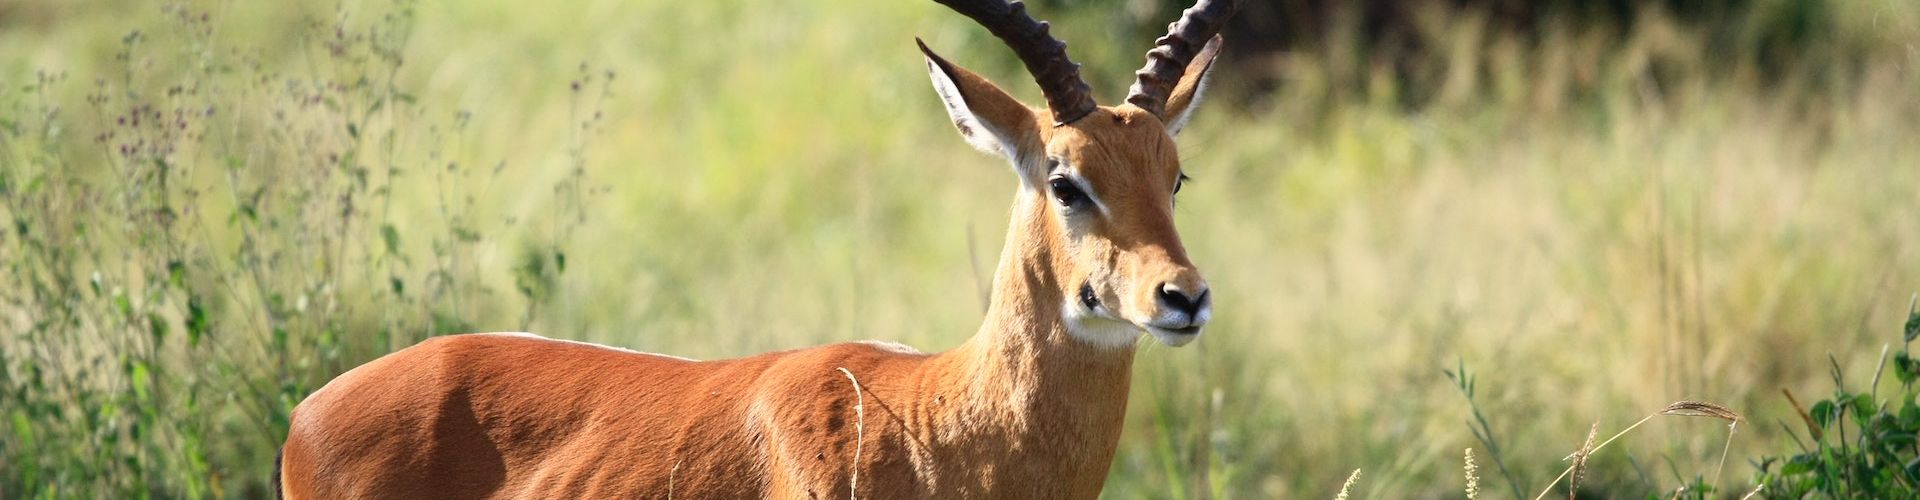 One of the many types of Antelopes to be seen in the National Parks of Tanzania